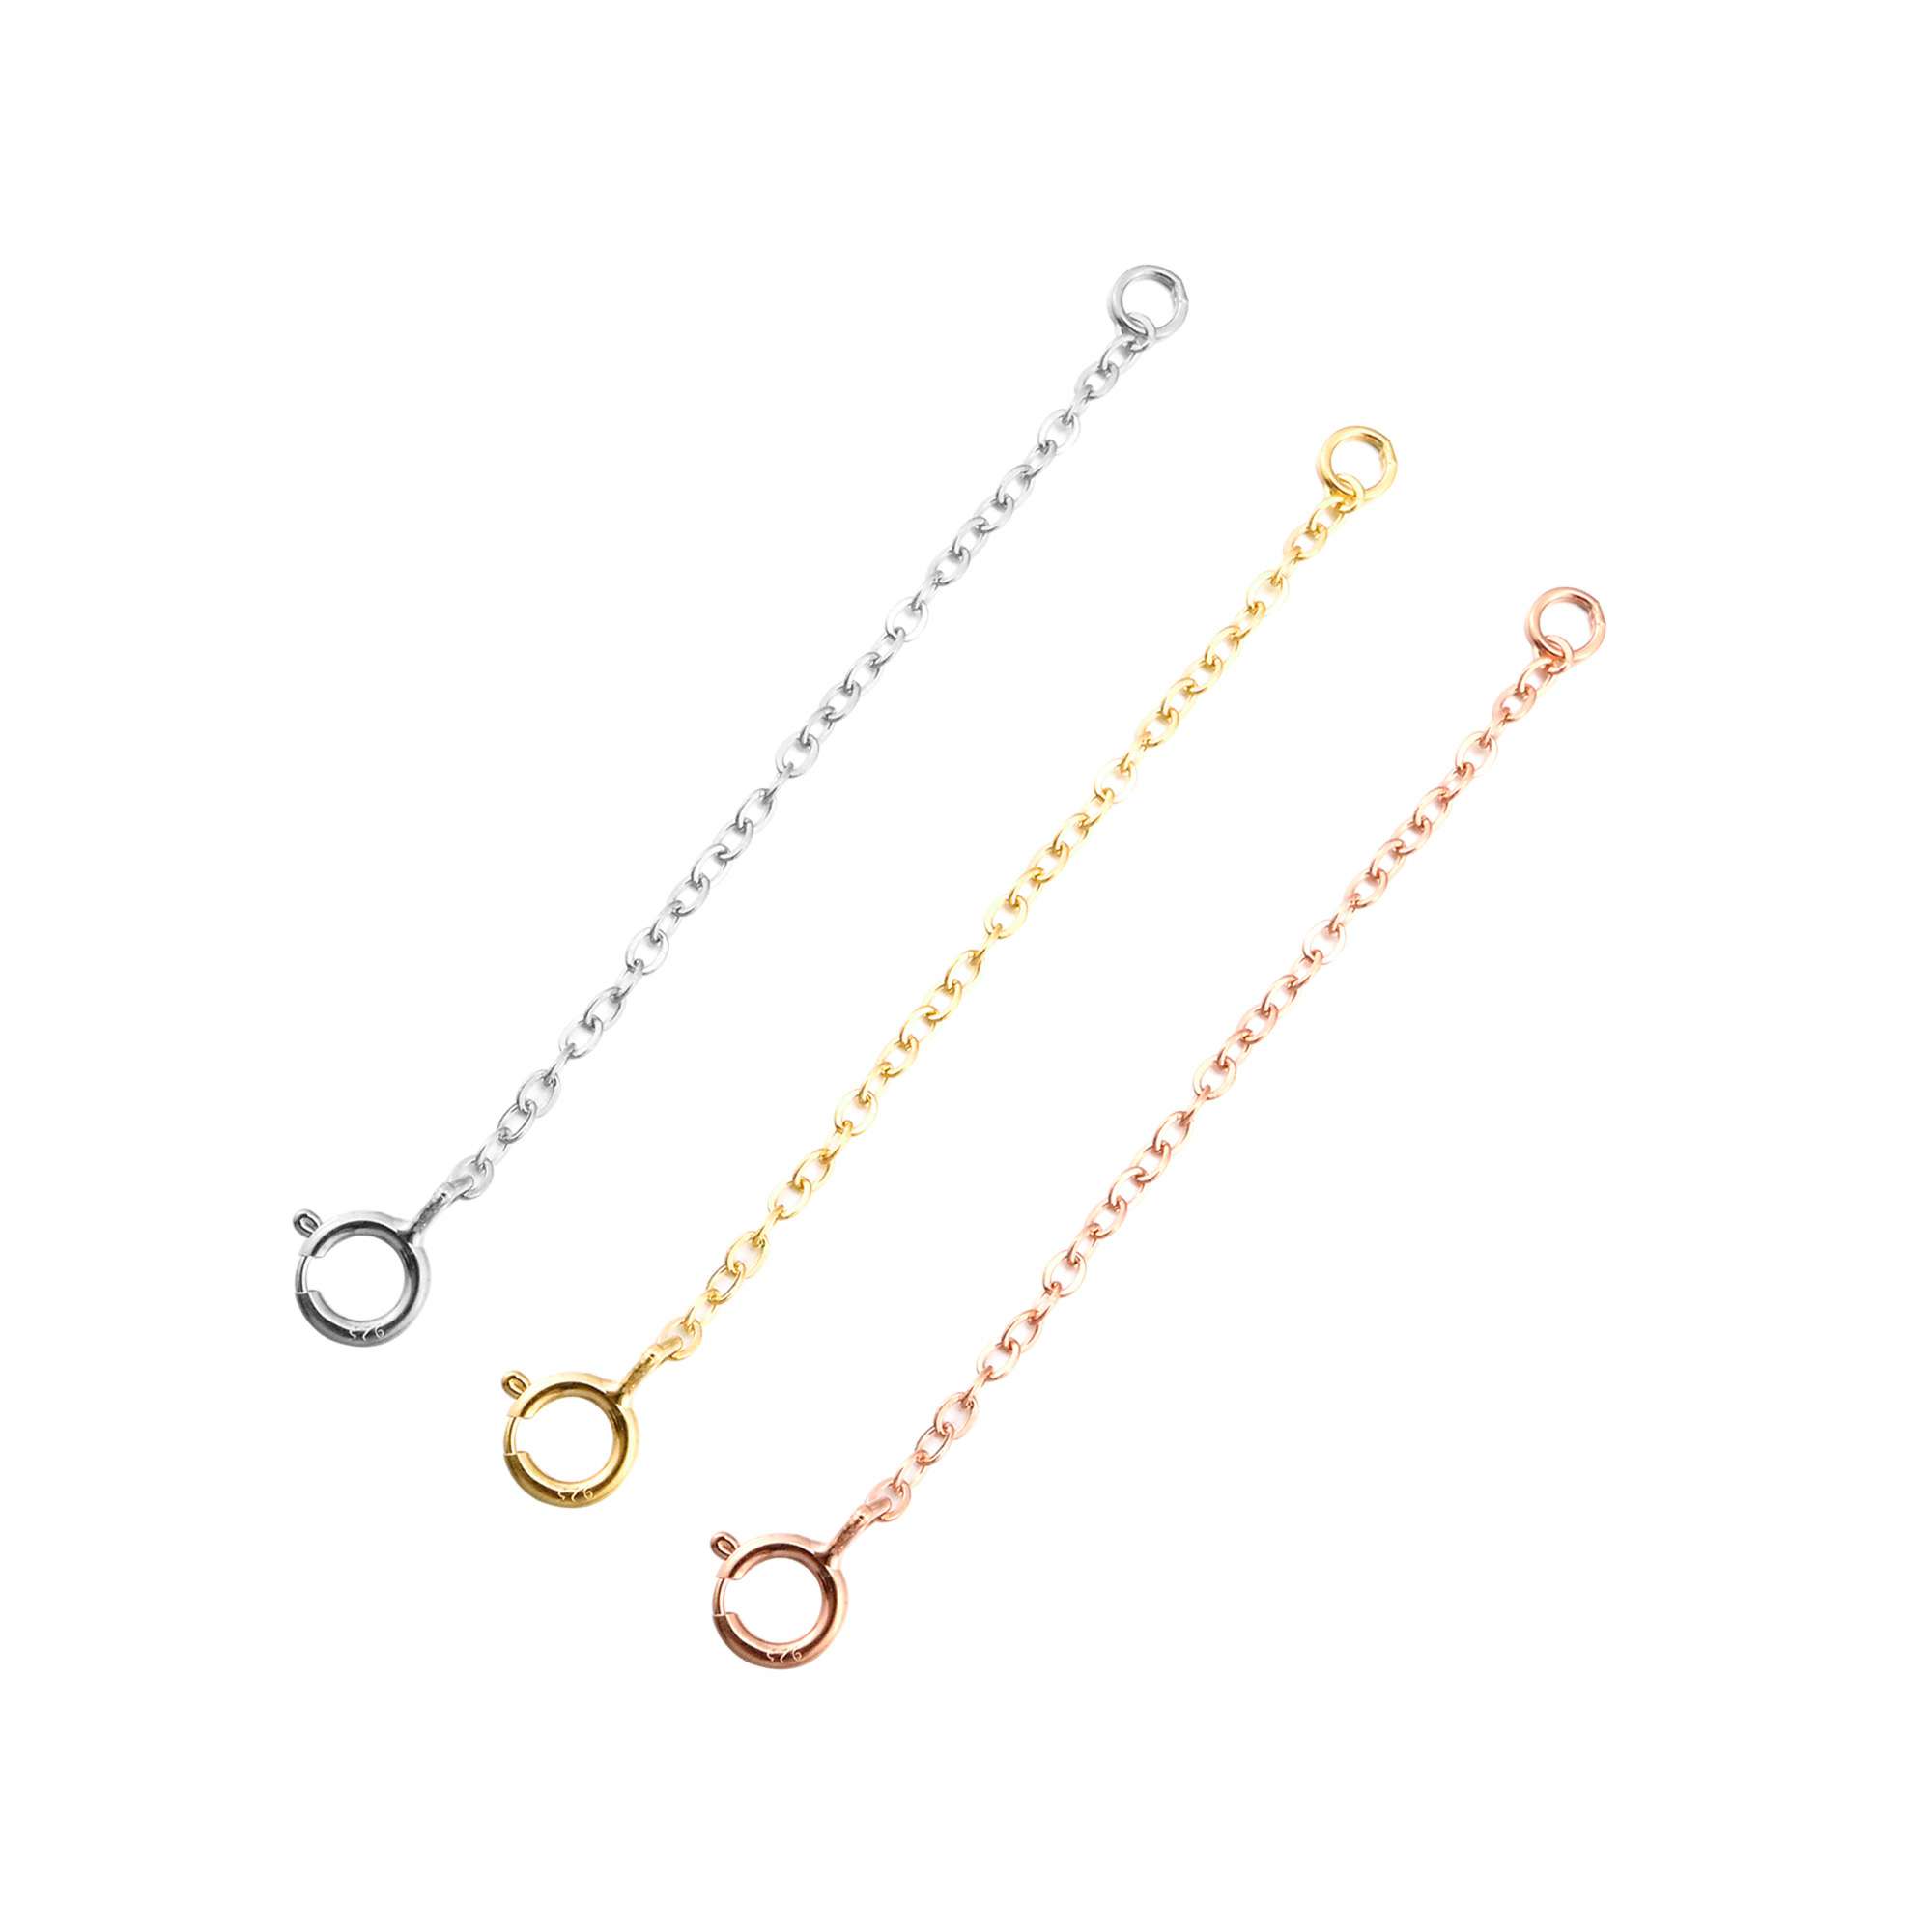 5pcs 3-8CM Extension Chain with Spring Ring Clasp for Necklace Rose Gold Plated Solid 925 Sterling Silver DIY Supplies 1320016 - Click Image to Close